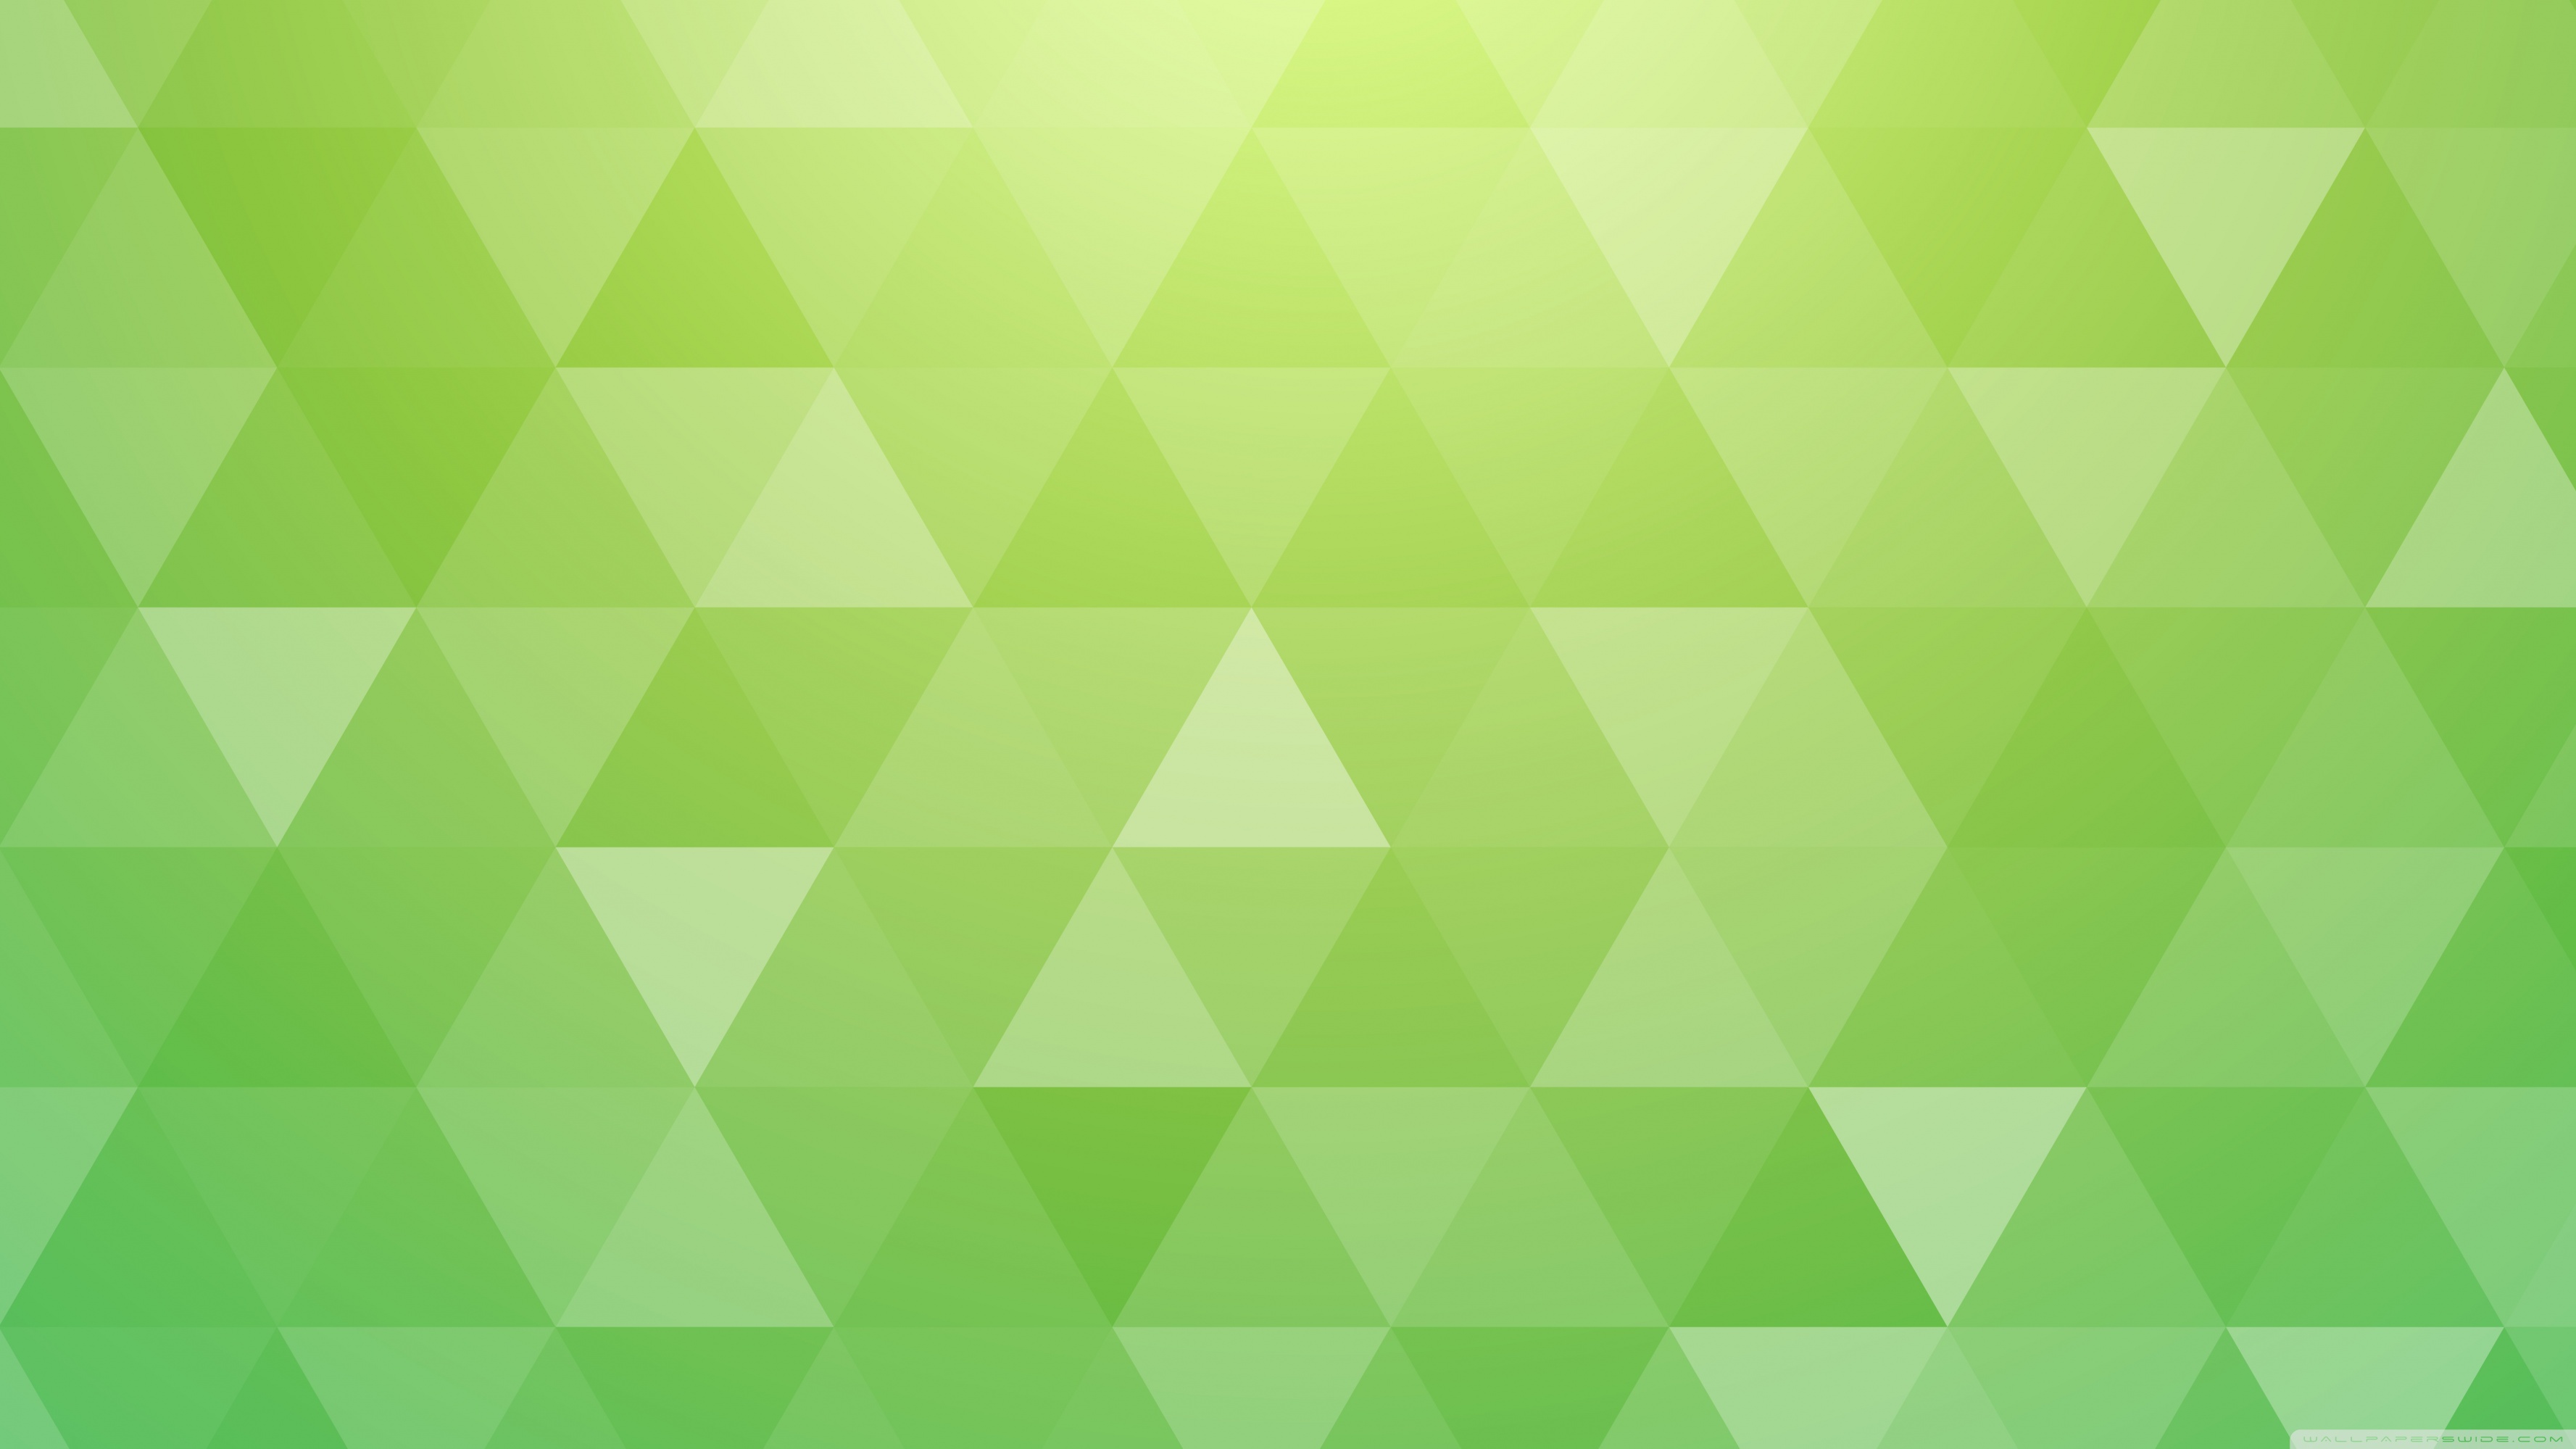 Background Abstract Green Hd - 3554x1999 Wallpaper 